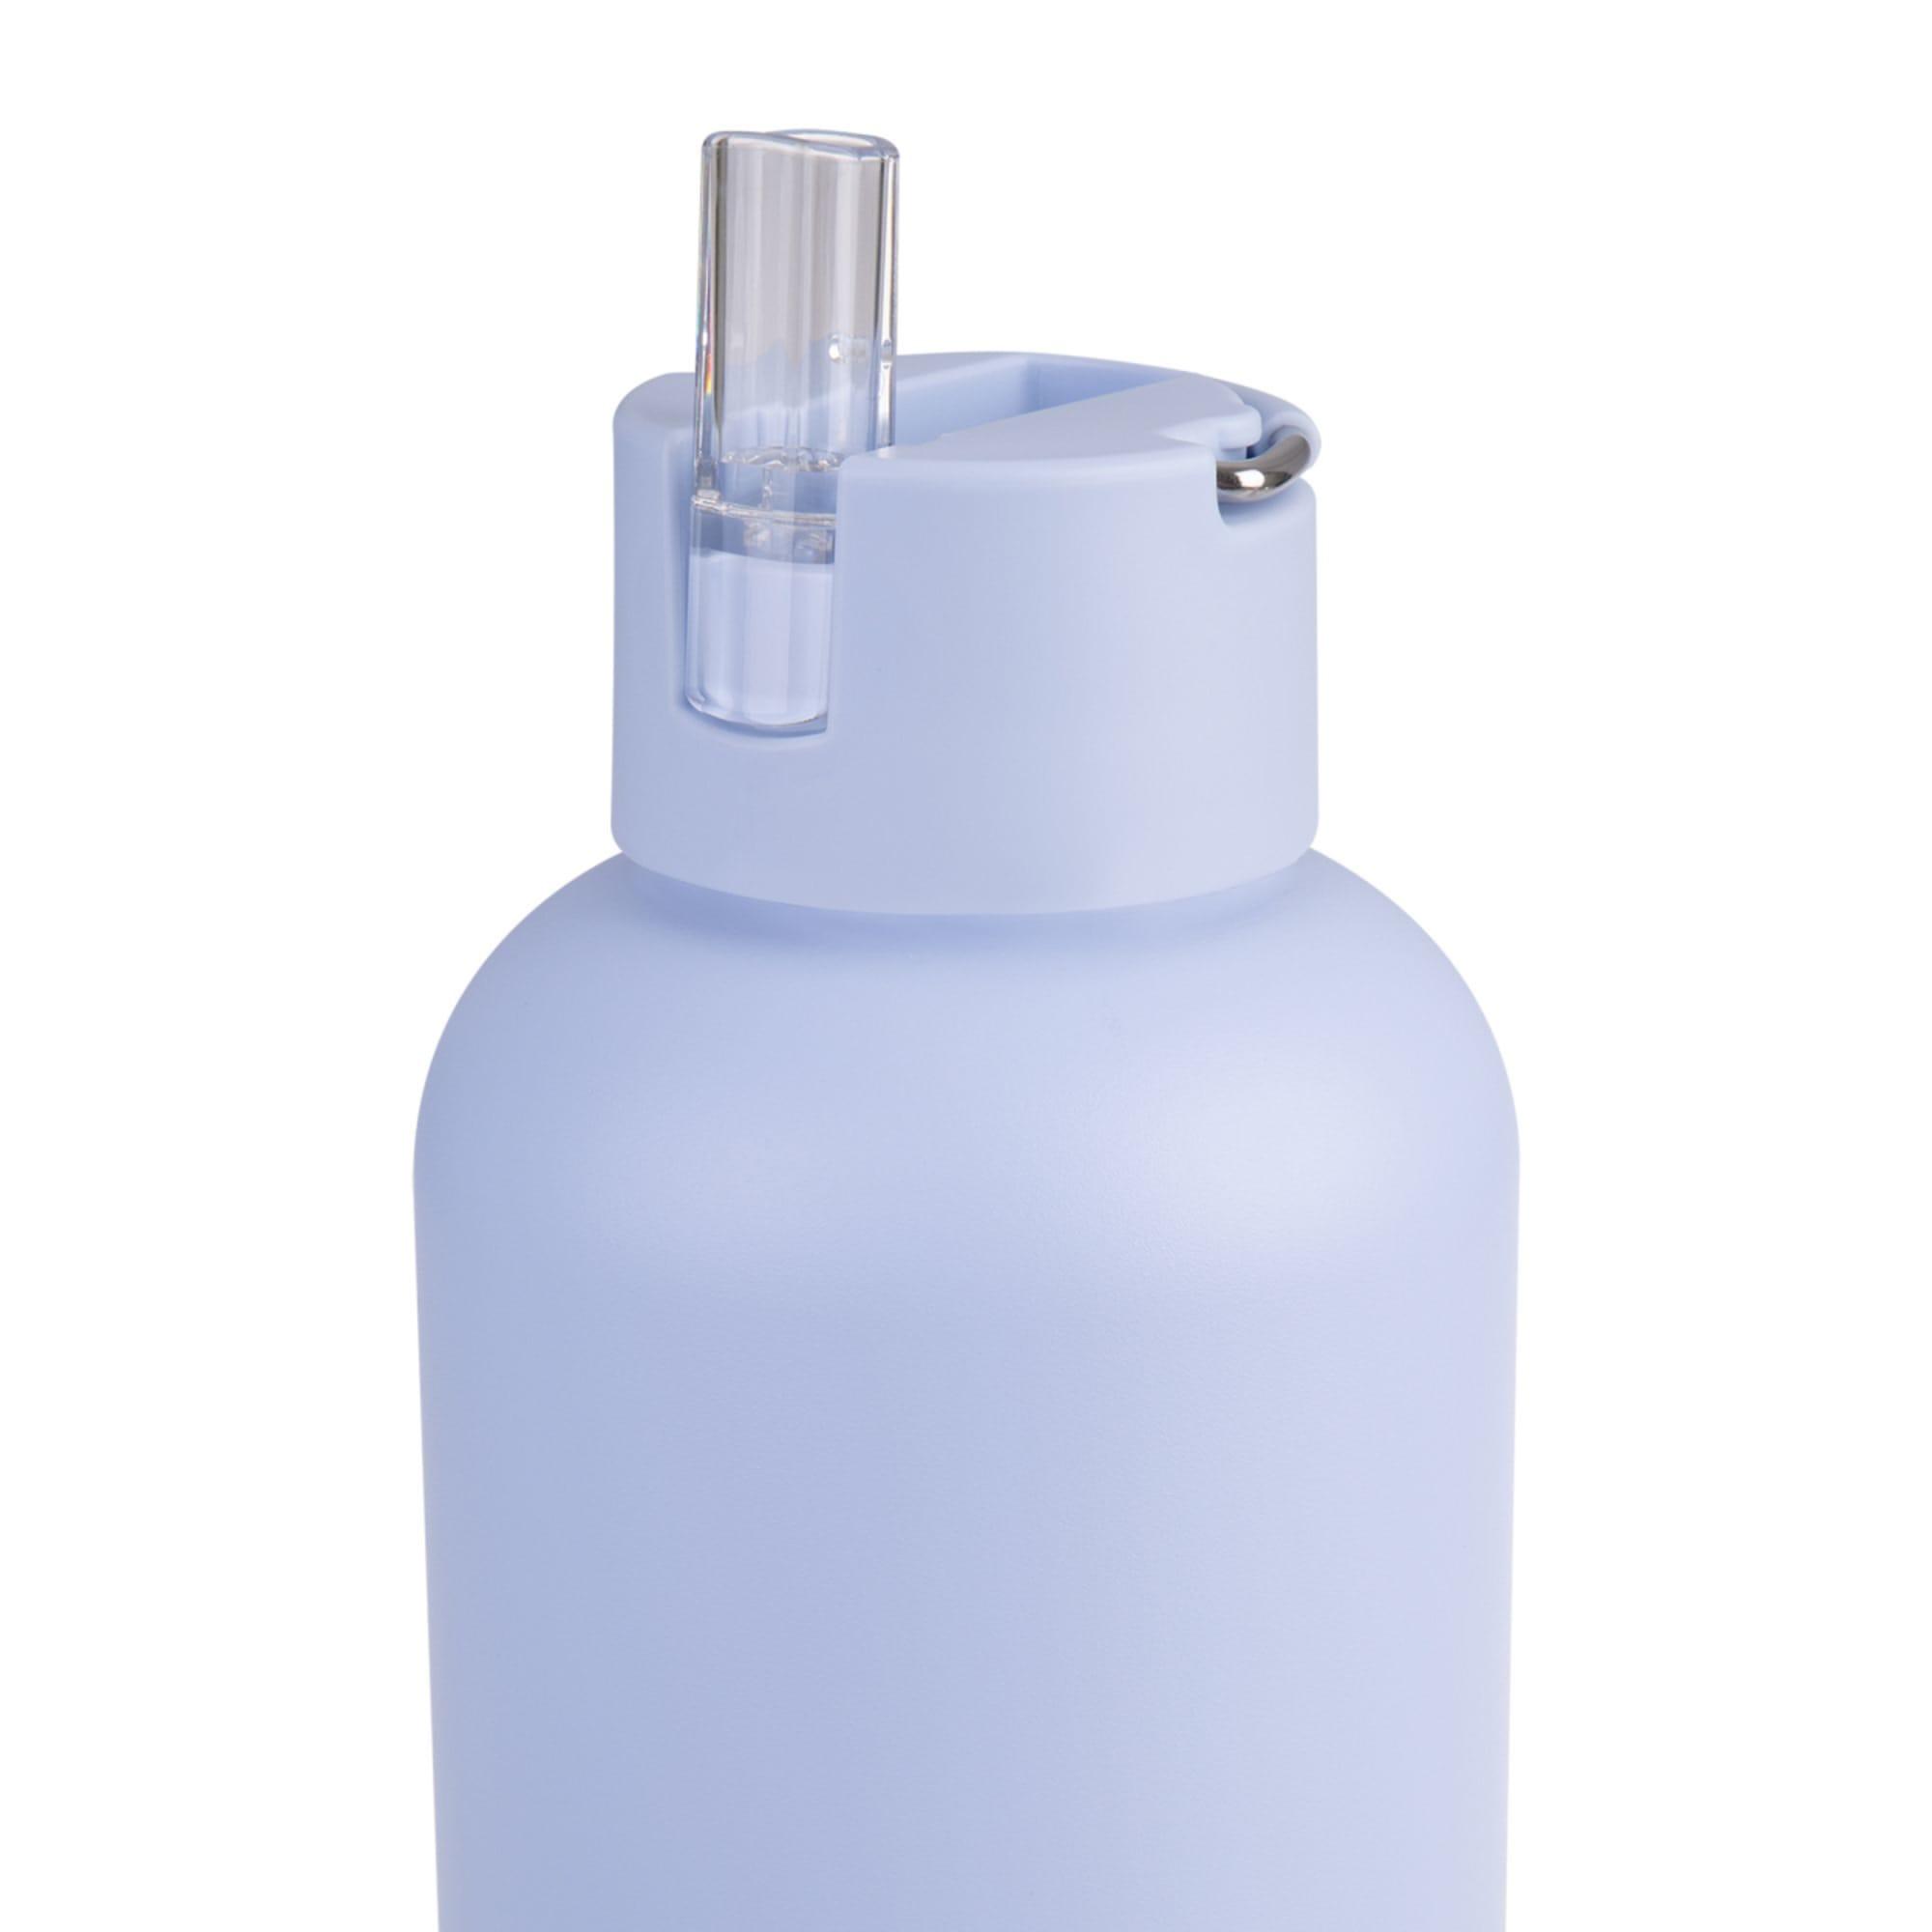 Oasis Moda Triple Wall Insulated Drink Bottle 1.5L Periwinkle Image 7